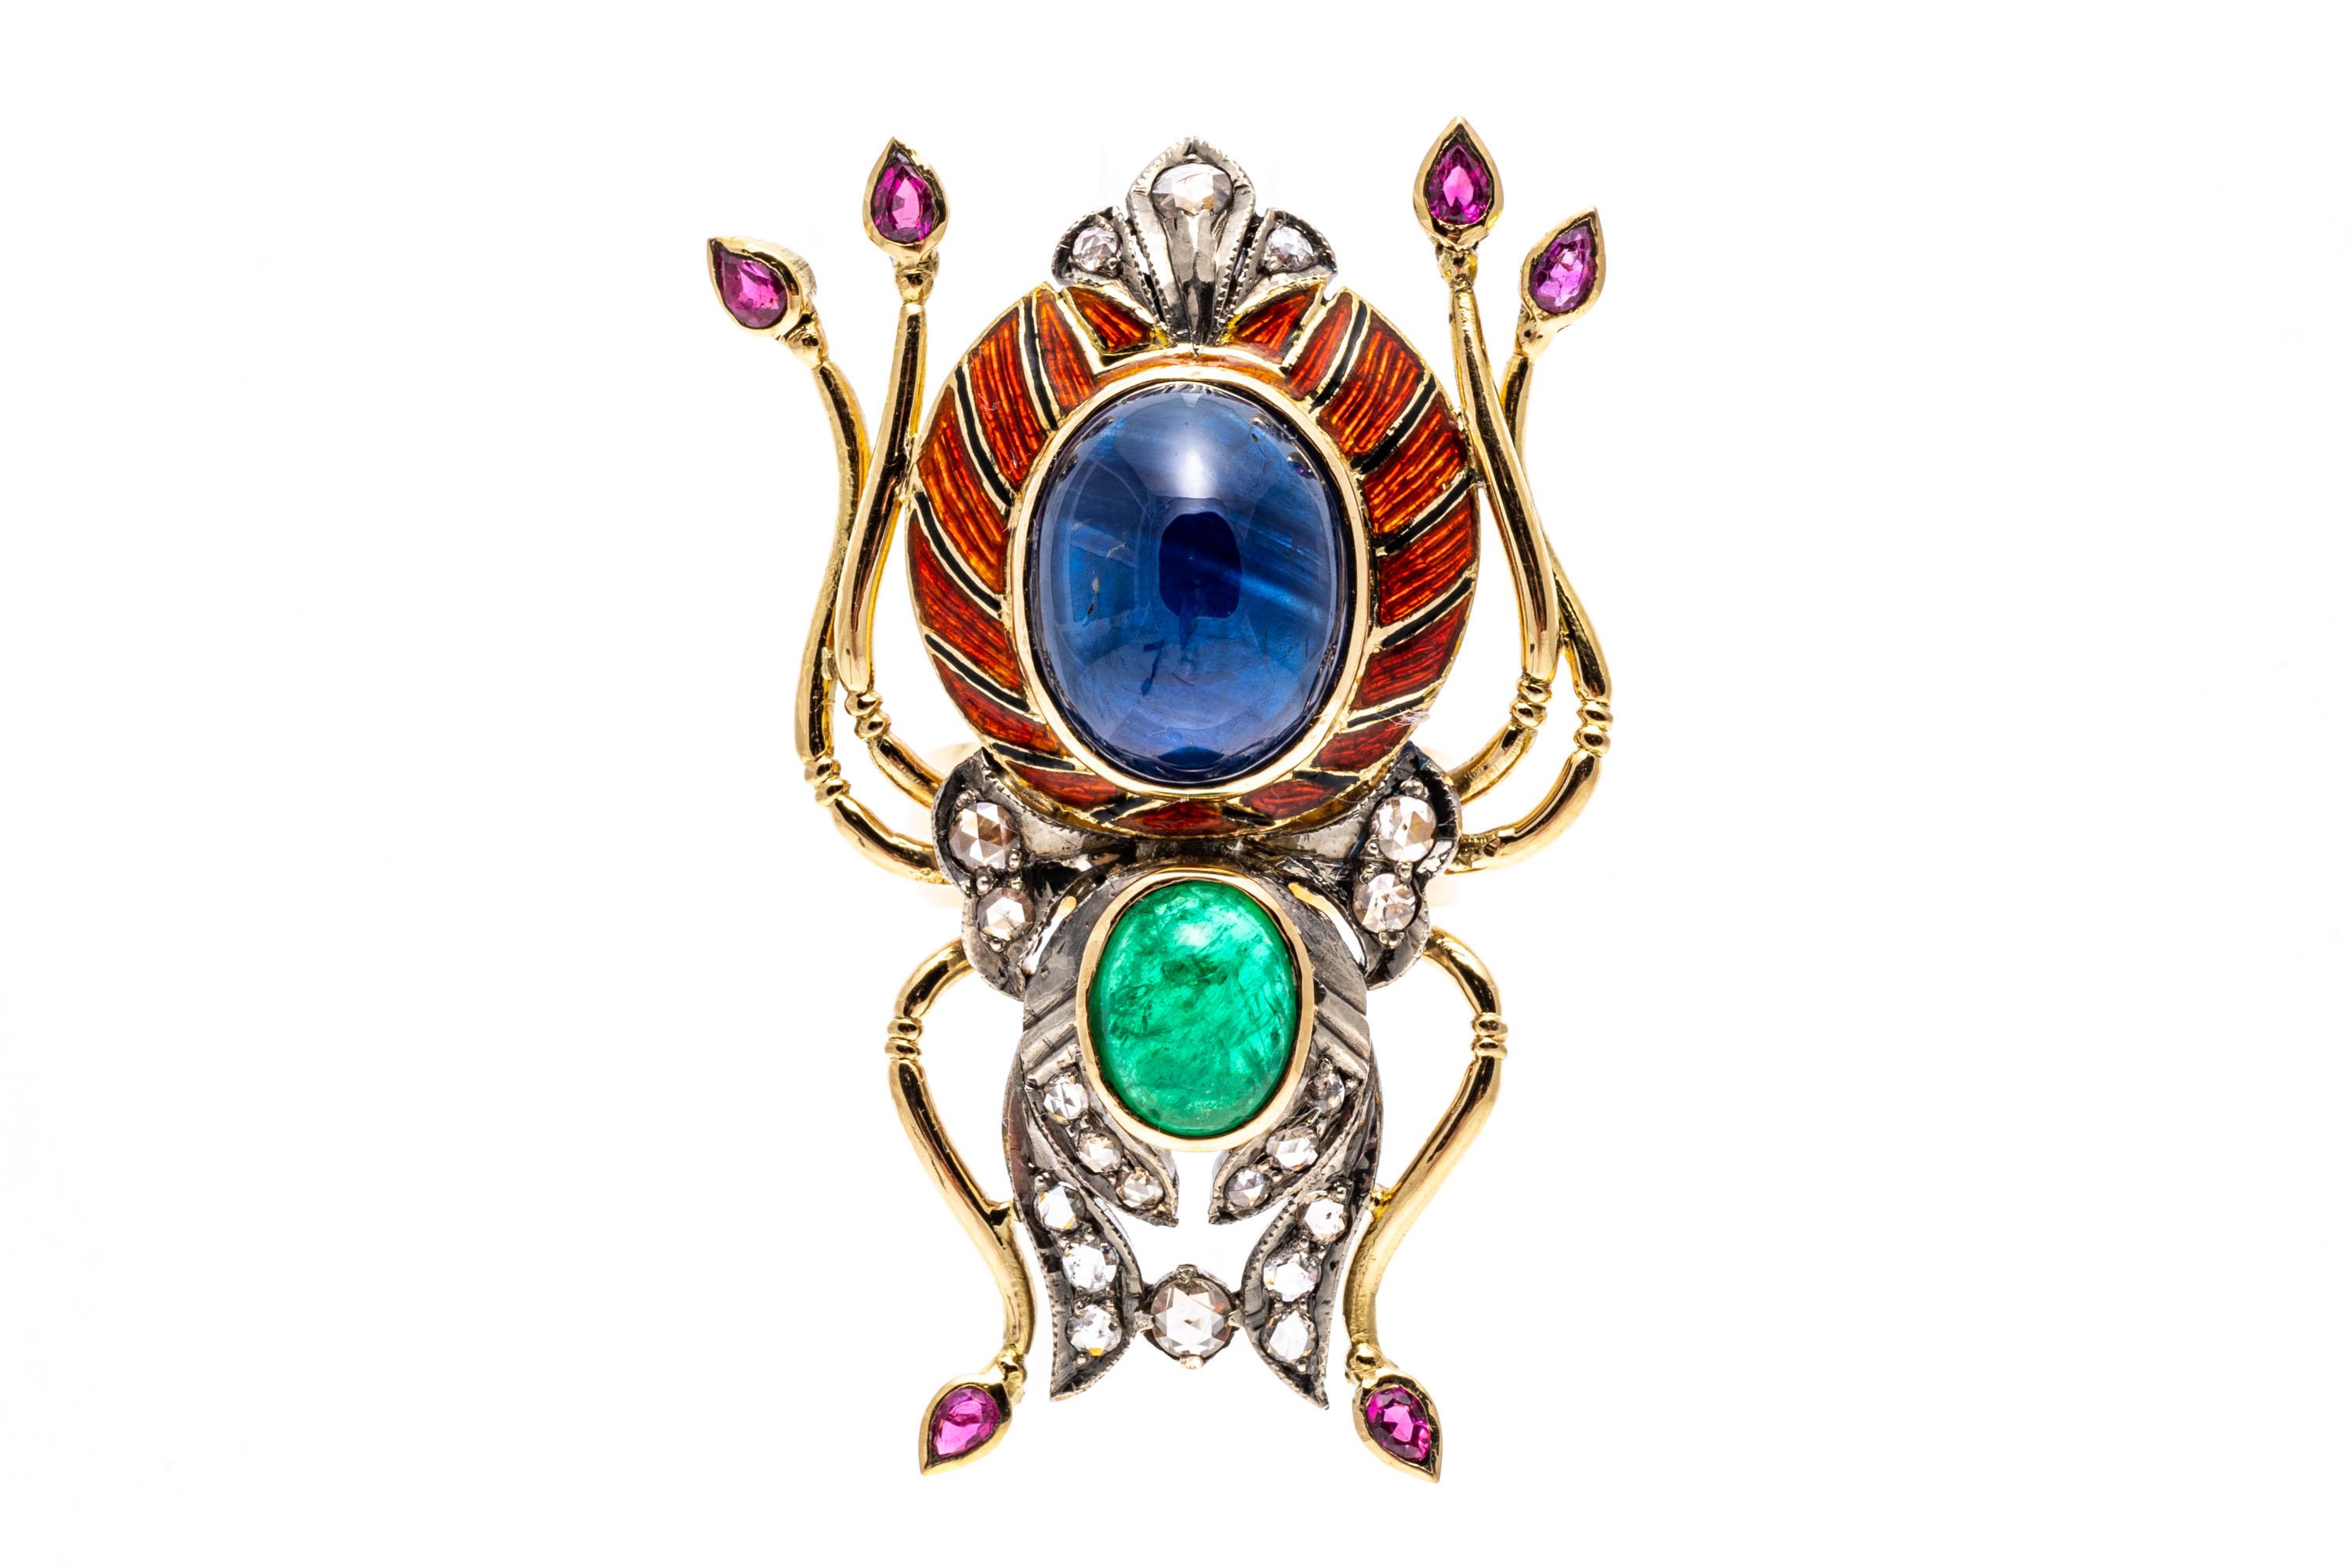 14k yellow gold and sterling silver ring. This imposing yellow gold ring is a large scarab style, with the body of the scarab set with an oval cabachon green emerald, bezel set, approximately 1.76 CTS and an oval cabachon medium to light blue